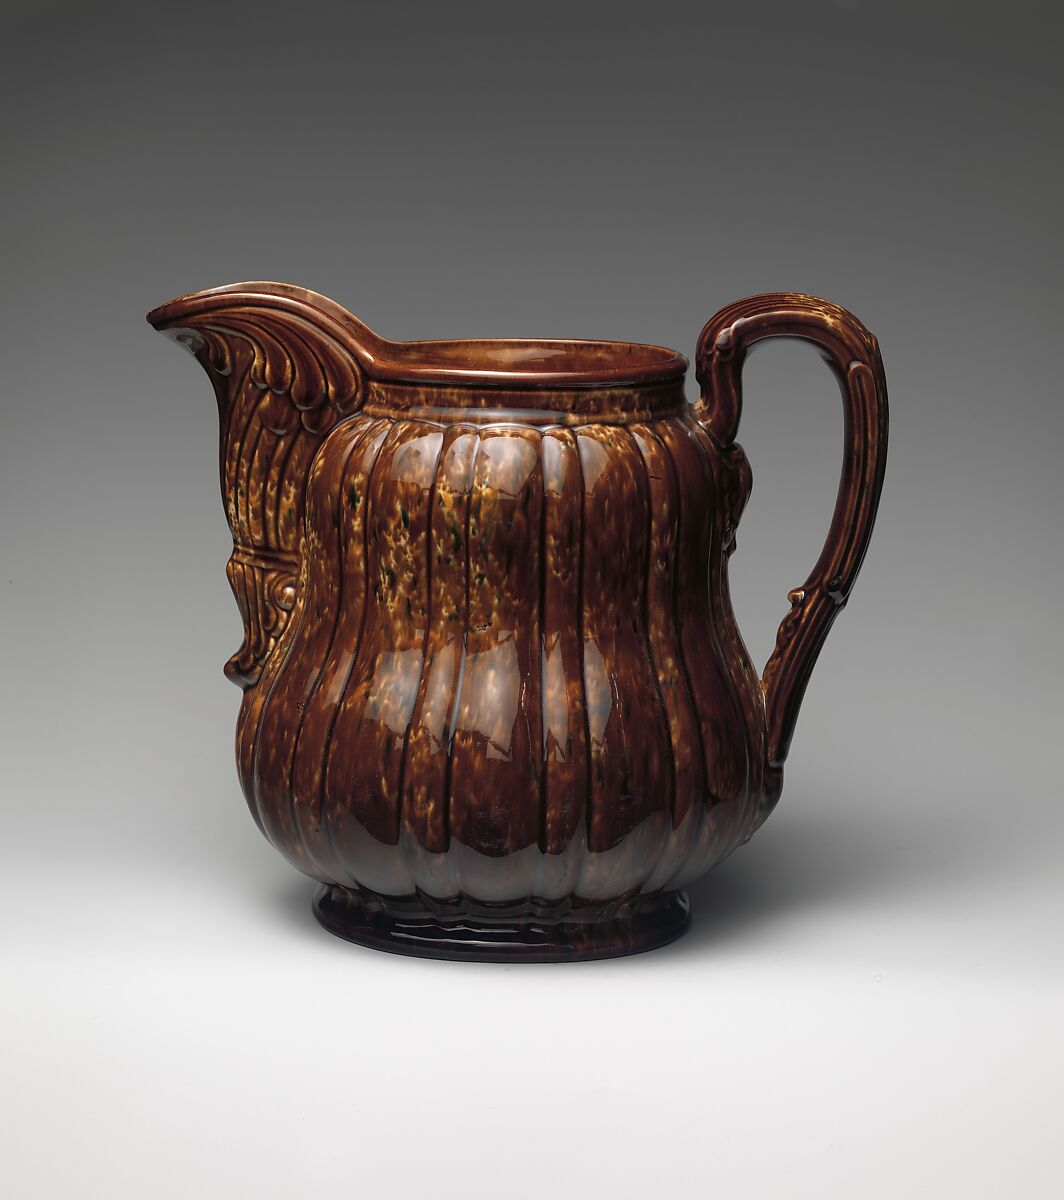 Pitcher, Probably United States Pottery Company (1852–58), Mottled brown earthenware, American 